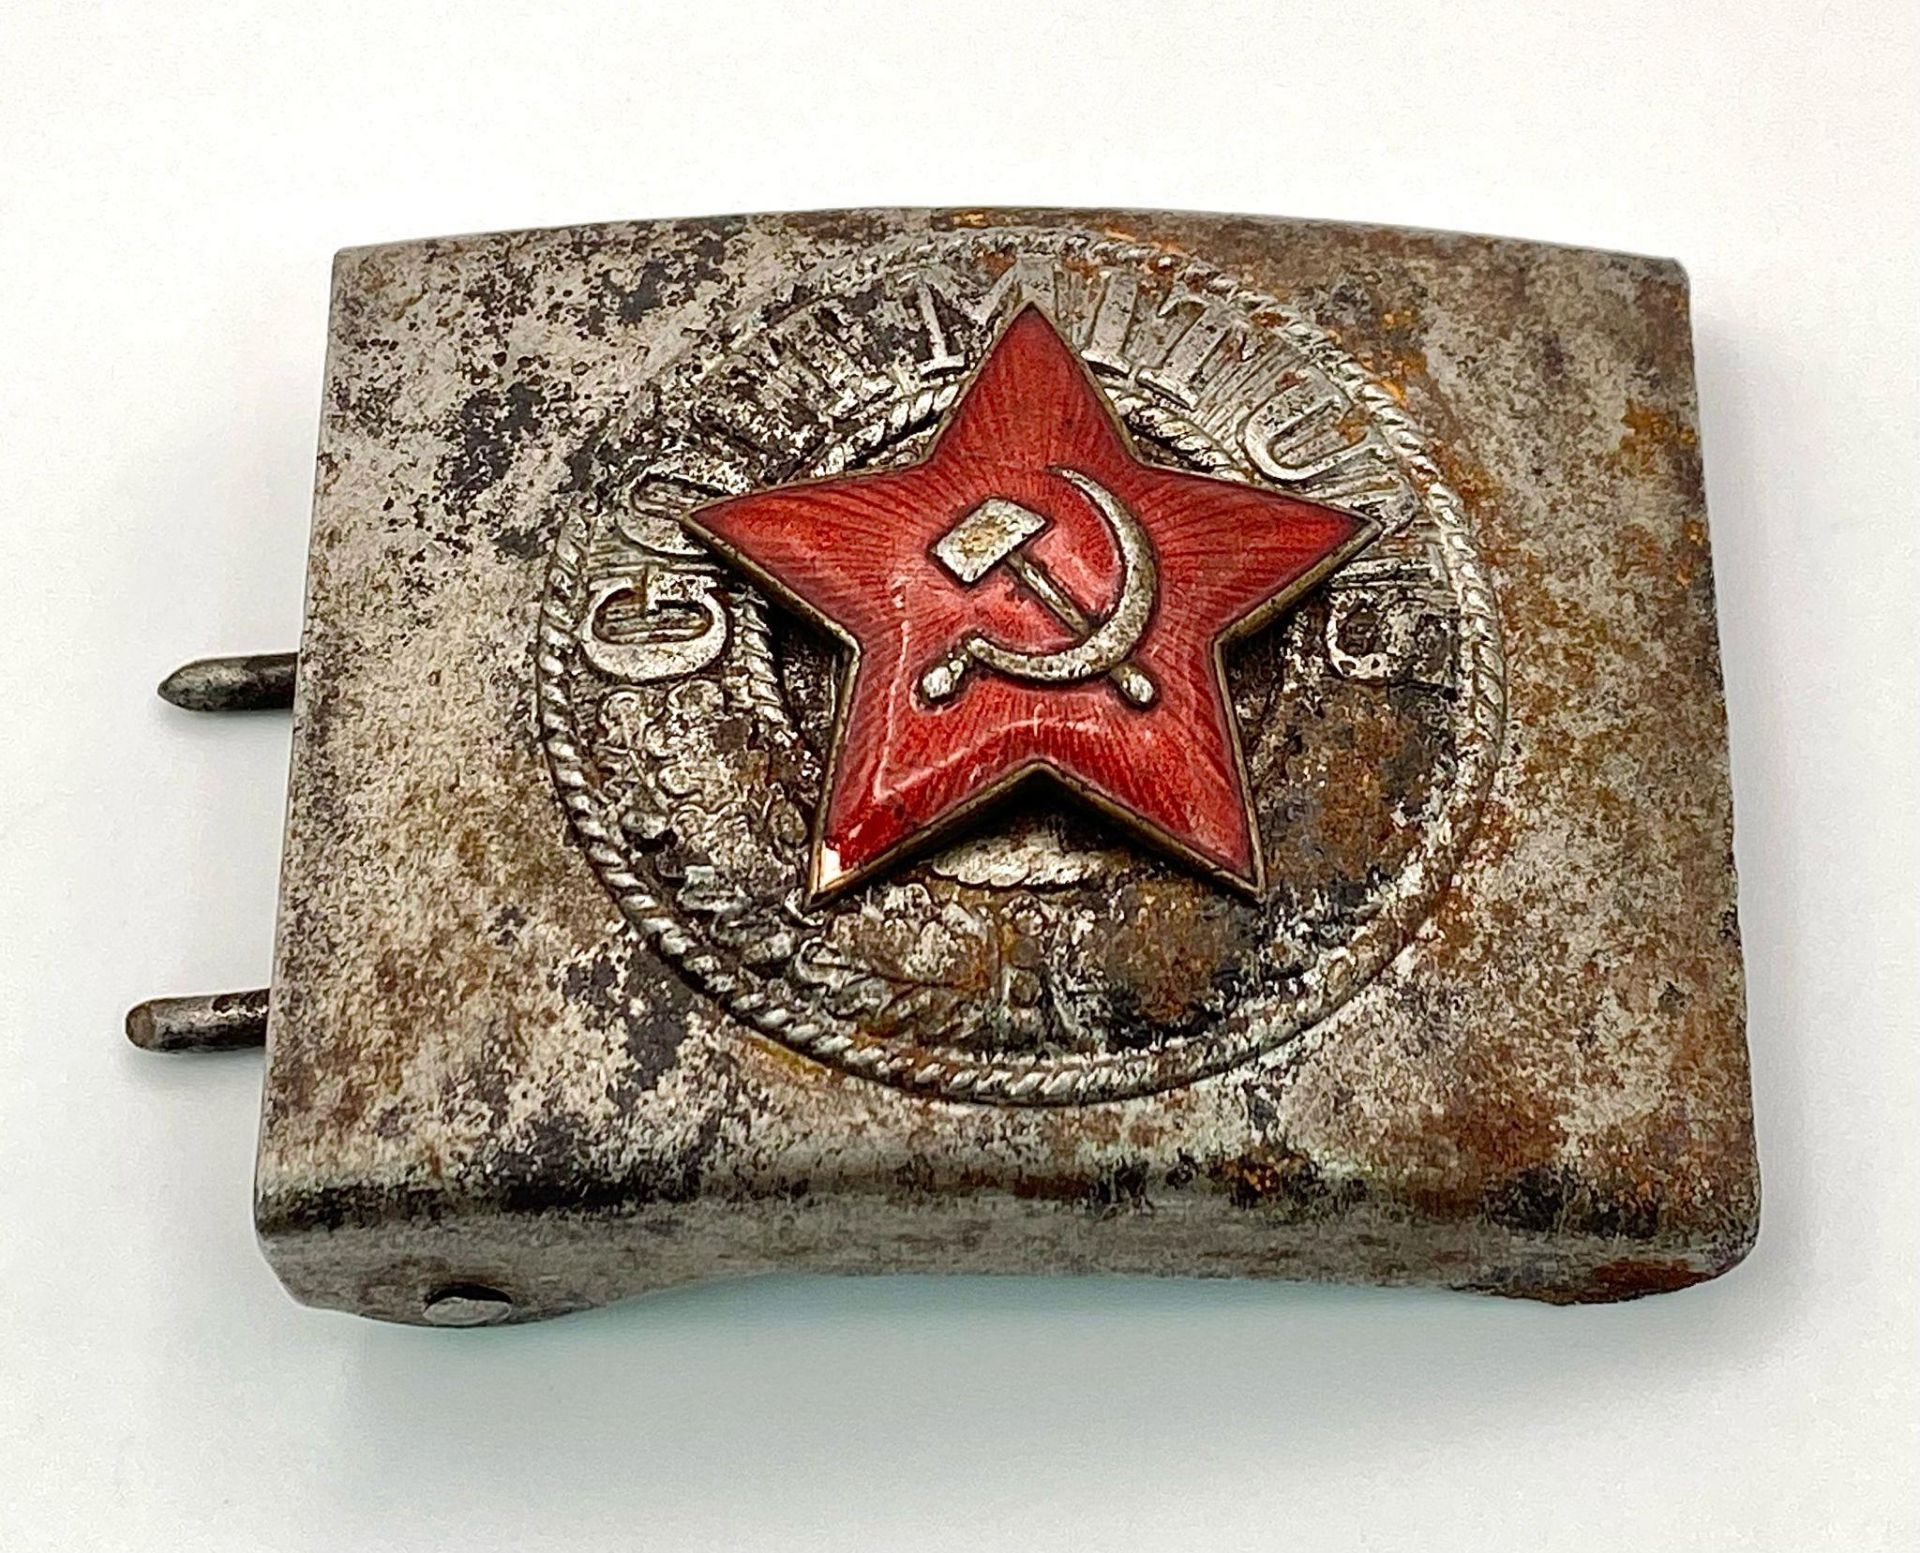 WW2 Soviet Russian Partisan Trophy, German Wehrmacht Buckle with the Red Star Hammer and Sickle